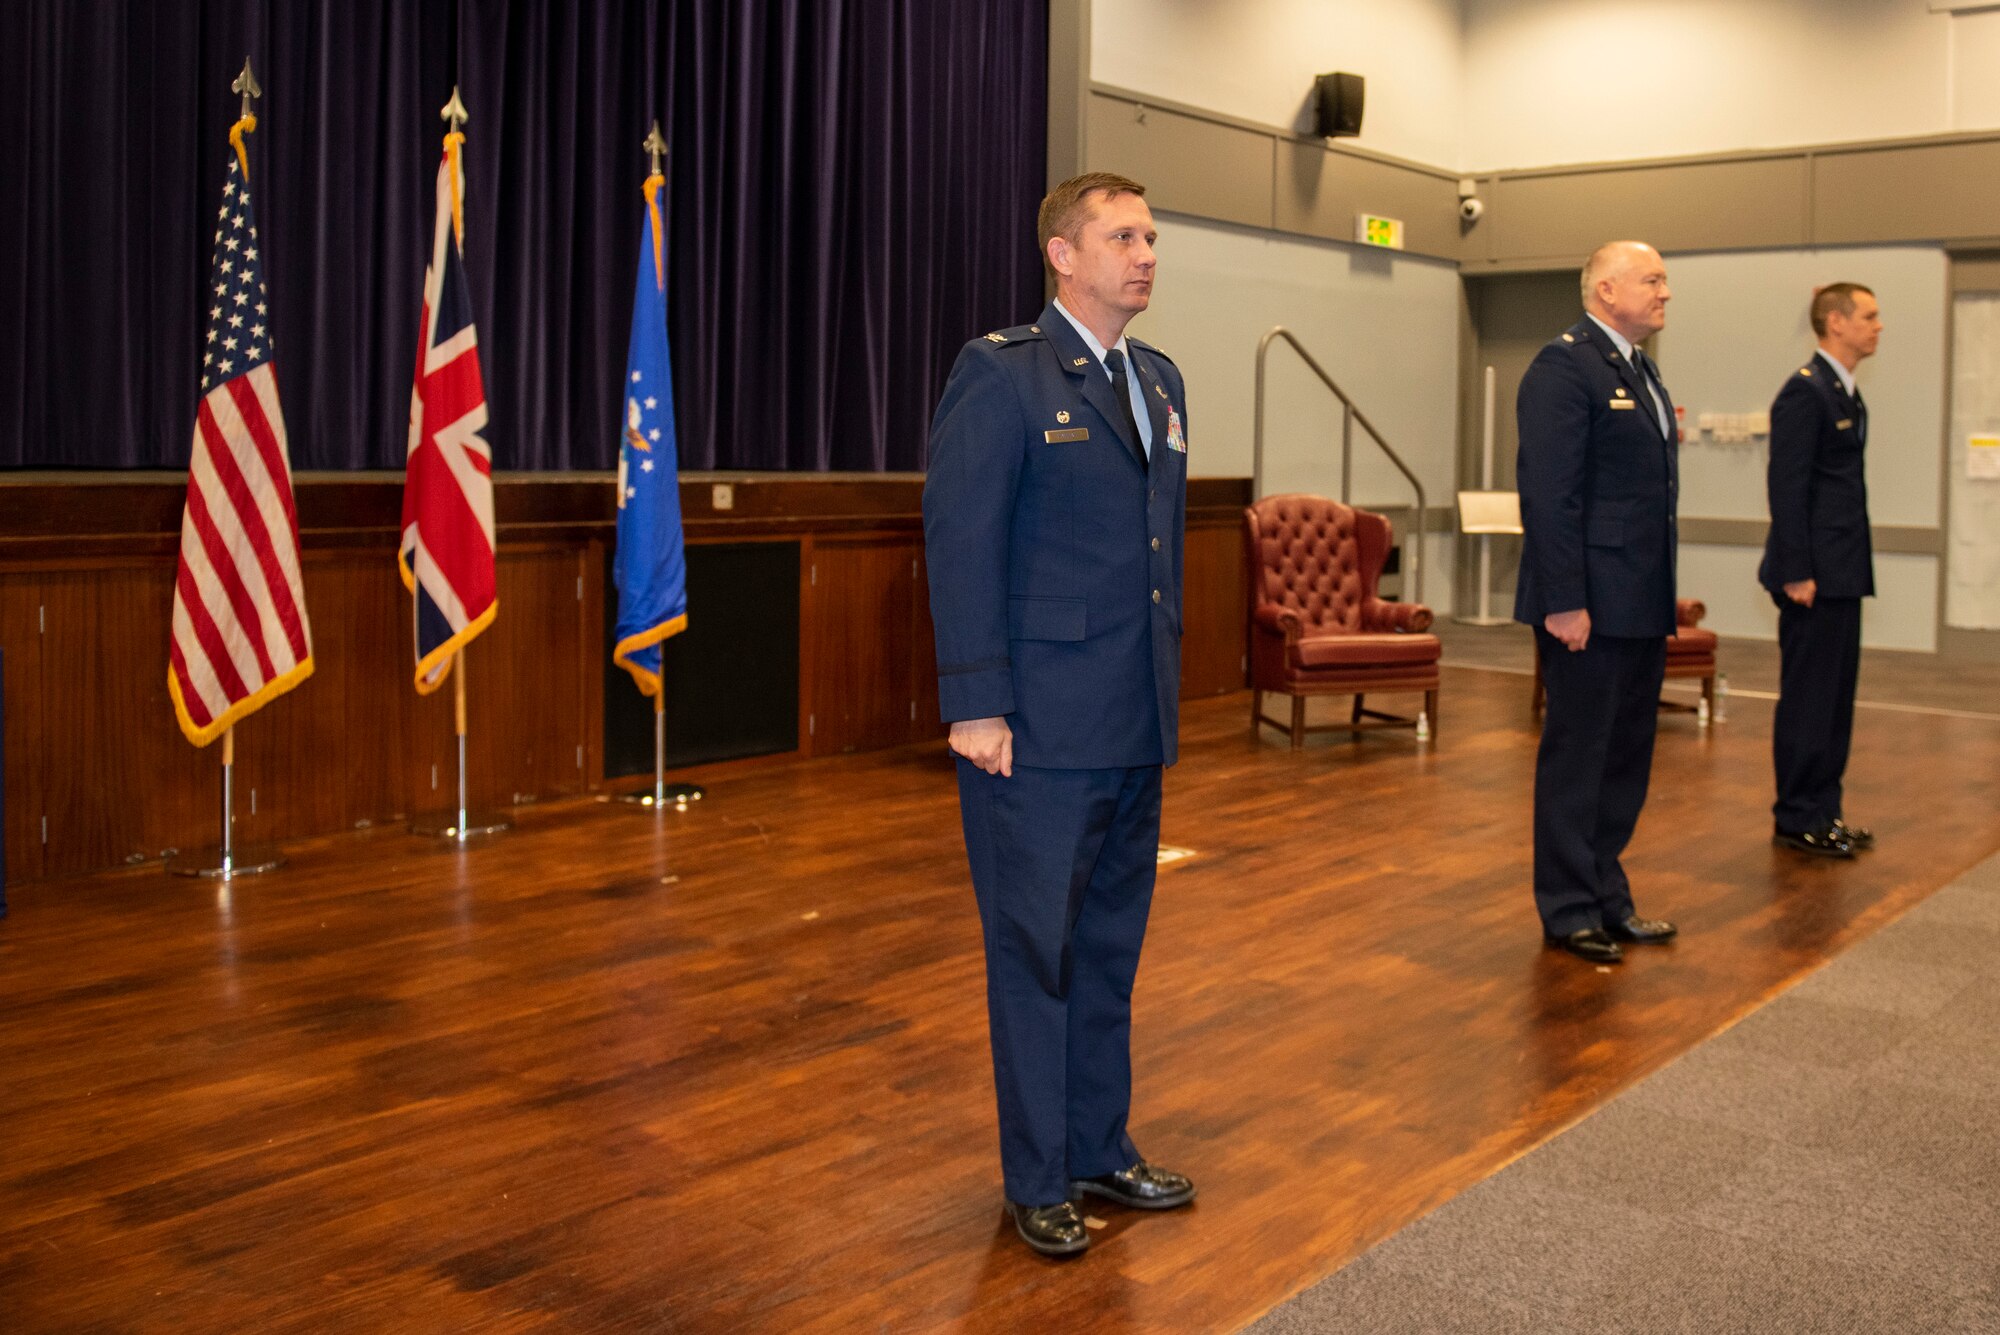 U.S. Air Force Col. Jon Hannah (left), 422d Air Base Group commander, Lt. Col. Matthew Ramstack (center), 422nd Air Base Squadron outgoing commander and Maj. Timothy Kirchner (right), 422nd ABS incoming commander, stand at attention during a change of command ceremony at RAF Croughton, England, July 9, 2020. The change of command ceremony is rooted in military history dating back to the 18th century representing the relinquishing of power from one officer to another. (U.S. Air Force photo by Airman 1st Class Jennifer Zima)